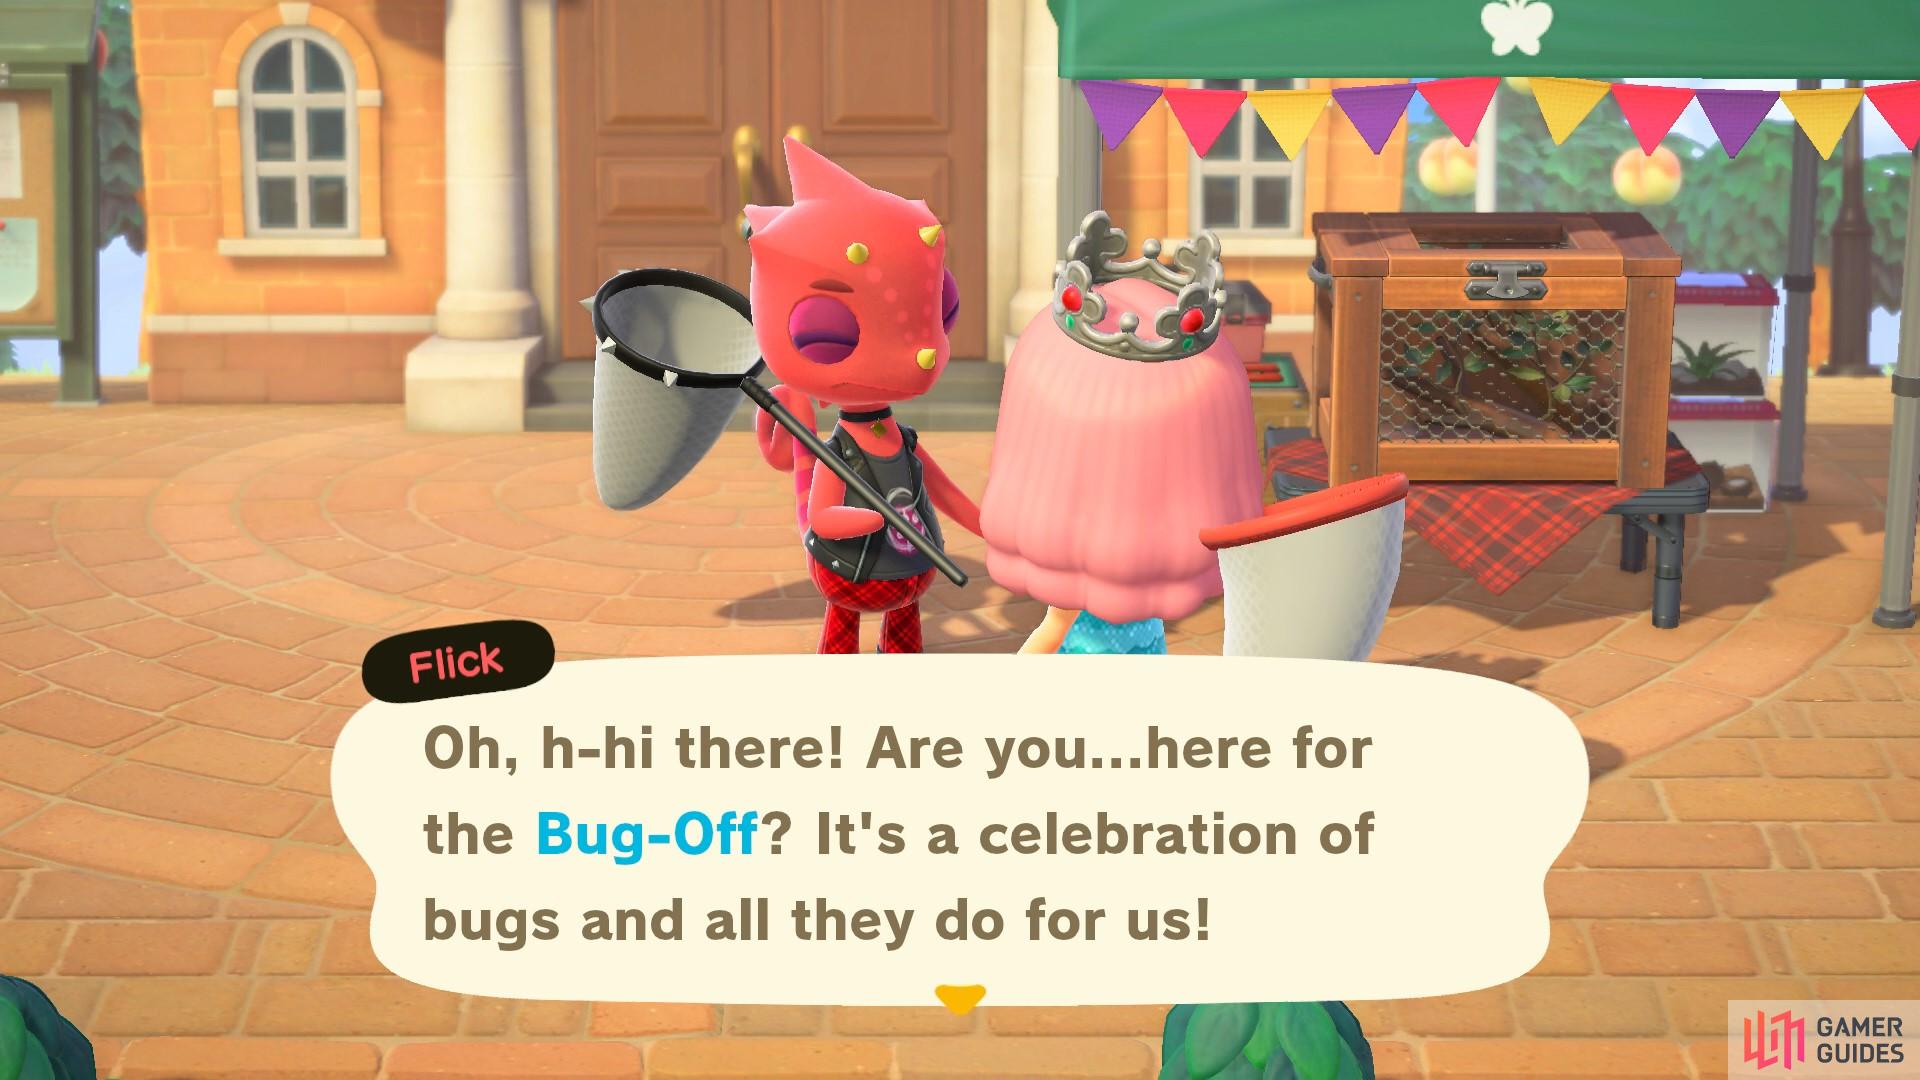 Bug-Offs are summer events where you catch as many bugs as possible to win bug-related rewards!